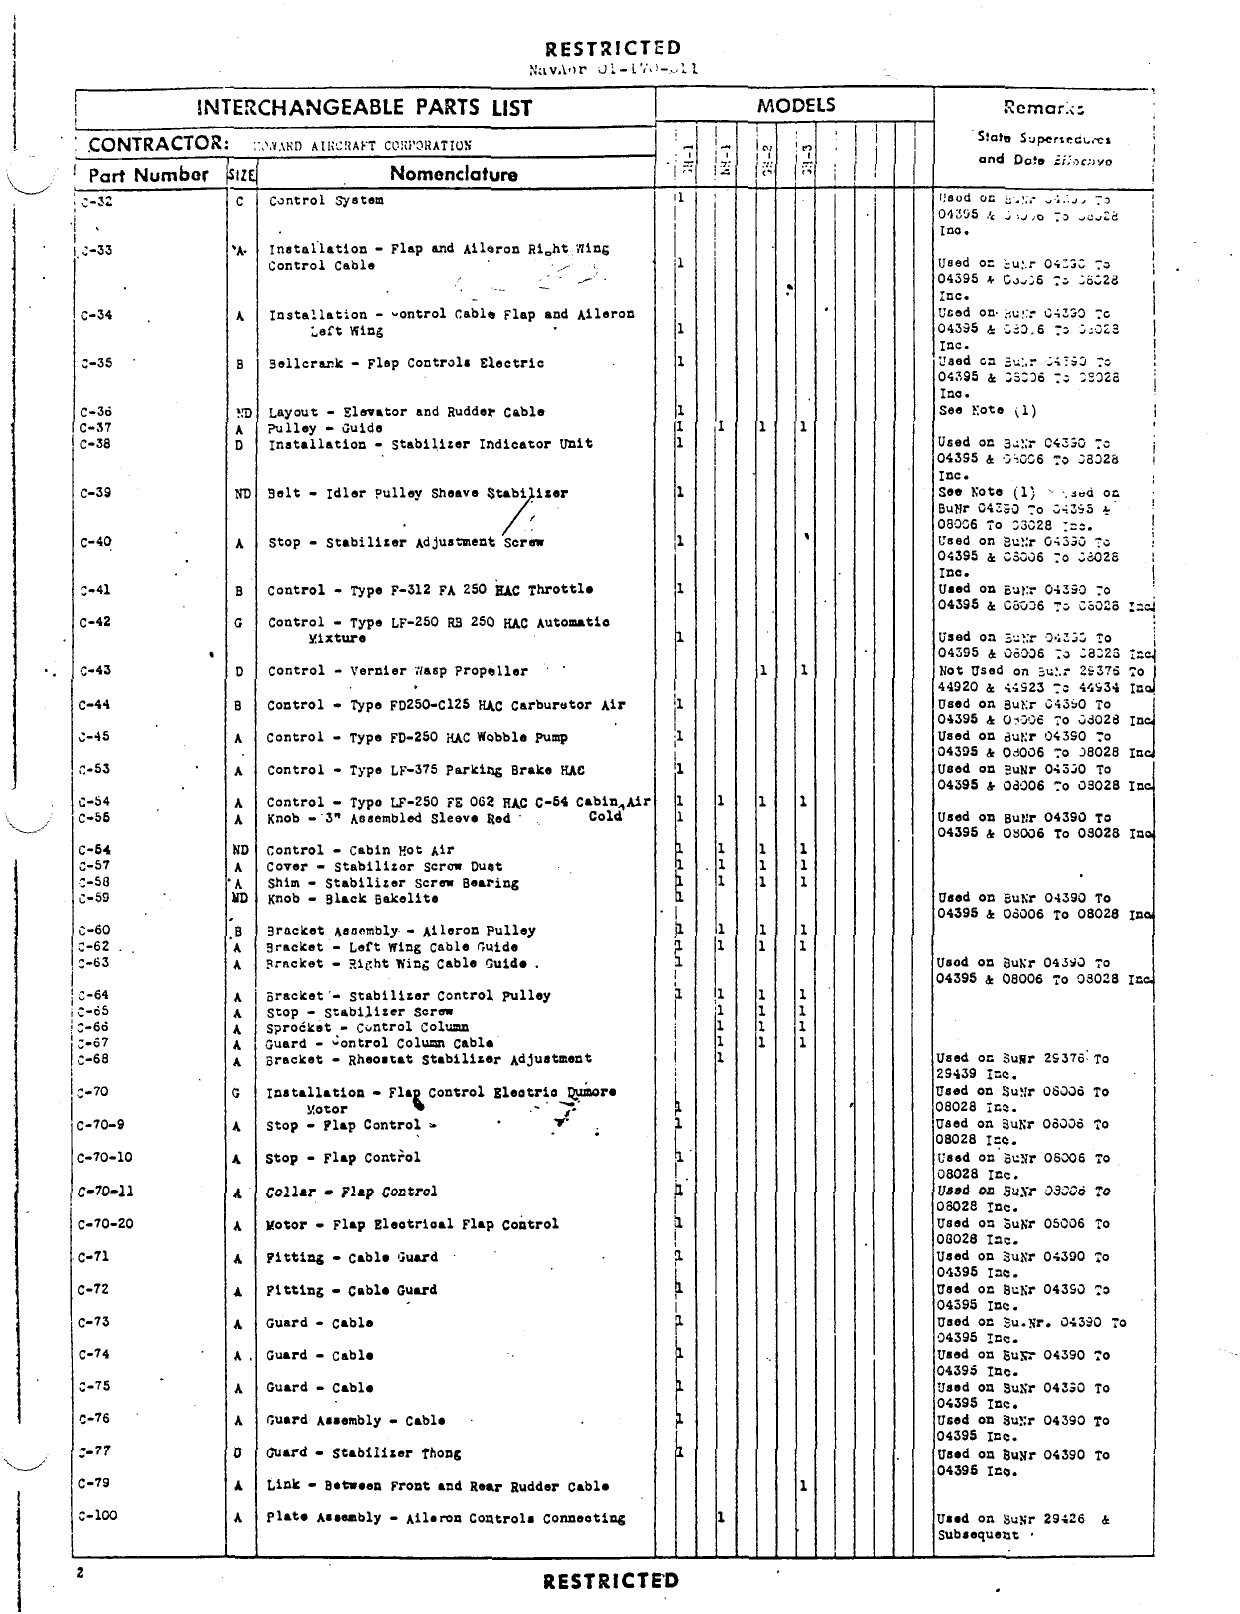 Sample page 5 from AirCorps Library document: Interchangeable Parts Catalog - GH-1, GH-2, GH-3, NH-1